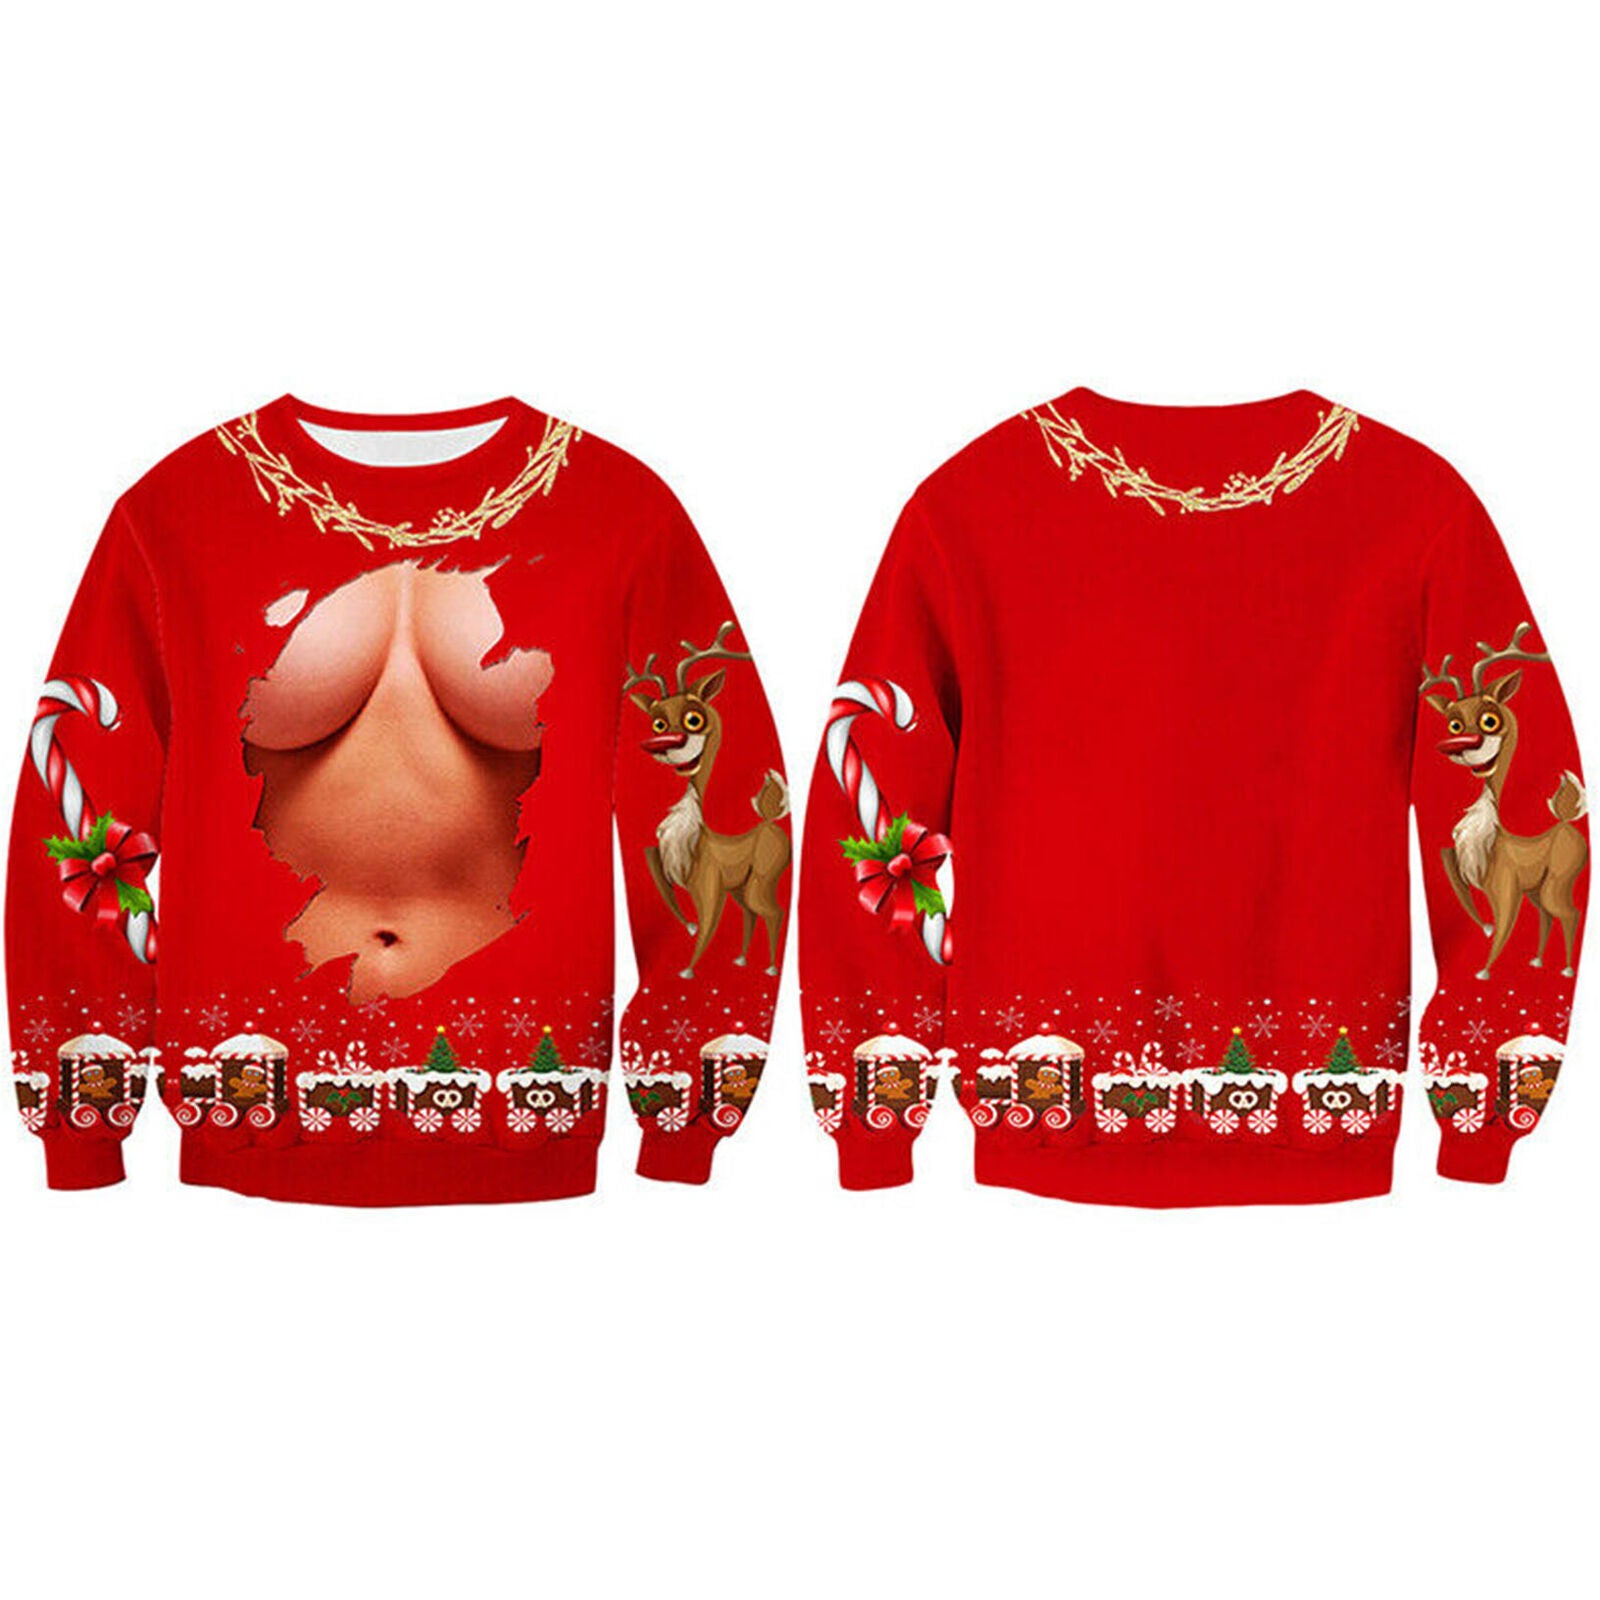 Mens Womens UGLY Christmas Sweater Sweatshirt Xmas Knitted Pullover Hoodie Tops